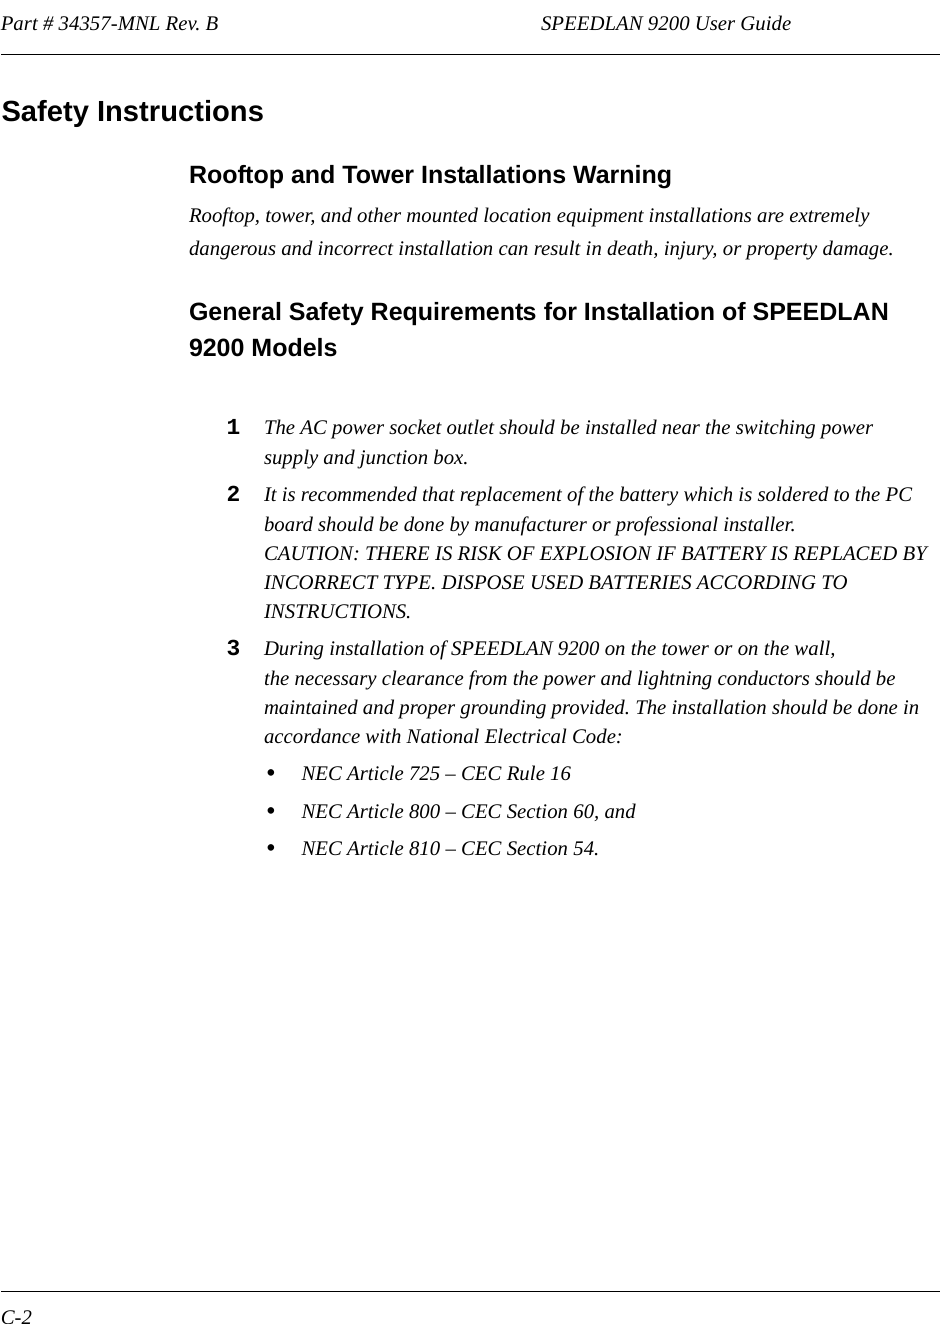 Part # 34357-MNL Rev. B                                                              SPEEDLAN 9200 User Guide C-2Safety InstructionsRooftop and Tower Installations Warning Rooftop, tower, and other mounted location equipment installations are extremely dangerous and incorrect installation can result in death, injury, or property damage.General Safety Requirements for Installation of SPEEDLAN 9200 Models1The AC power socket outlet should be installed near the switching power supply and junction box.2It is recommended that replacement of the battery which is soldered to the PC board should be done by manufacturer or professional installer. CAUTION: THERE IS RISK OF EXPLOSION IF BATTERY IS REPLACED BY INCORRECT TYPE. DISPOSE USED BATTERIES ACCORDING TO INSTRUCTIONS.3During installation of SPEEDLAN 9200 on the tower or on the wall, the necessary clearance from the power and lightning conductors should be maintained and proper grounding provided. The installation should be done in accordance with National Electrical Code:•NEC Article 725 – CEC Rule 16•NEC Article 800 – CEC Section 60, and•NEC Article 810 – CEC Section 54.              